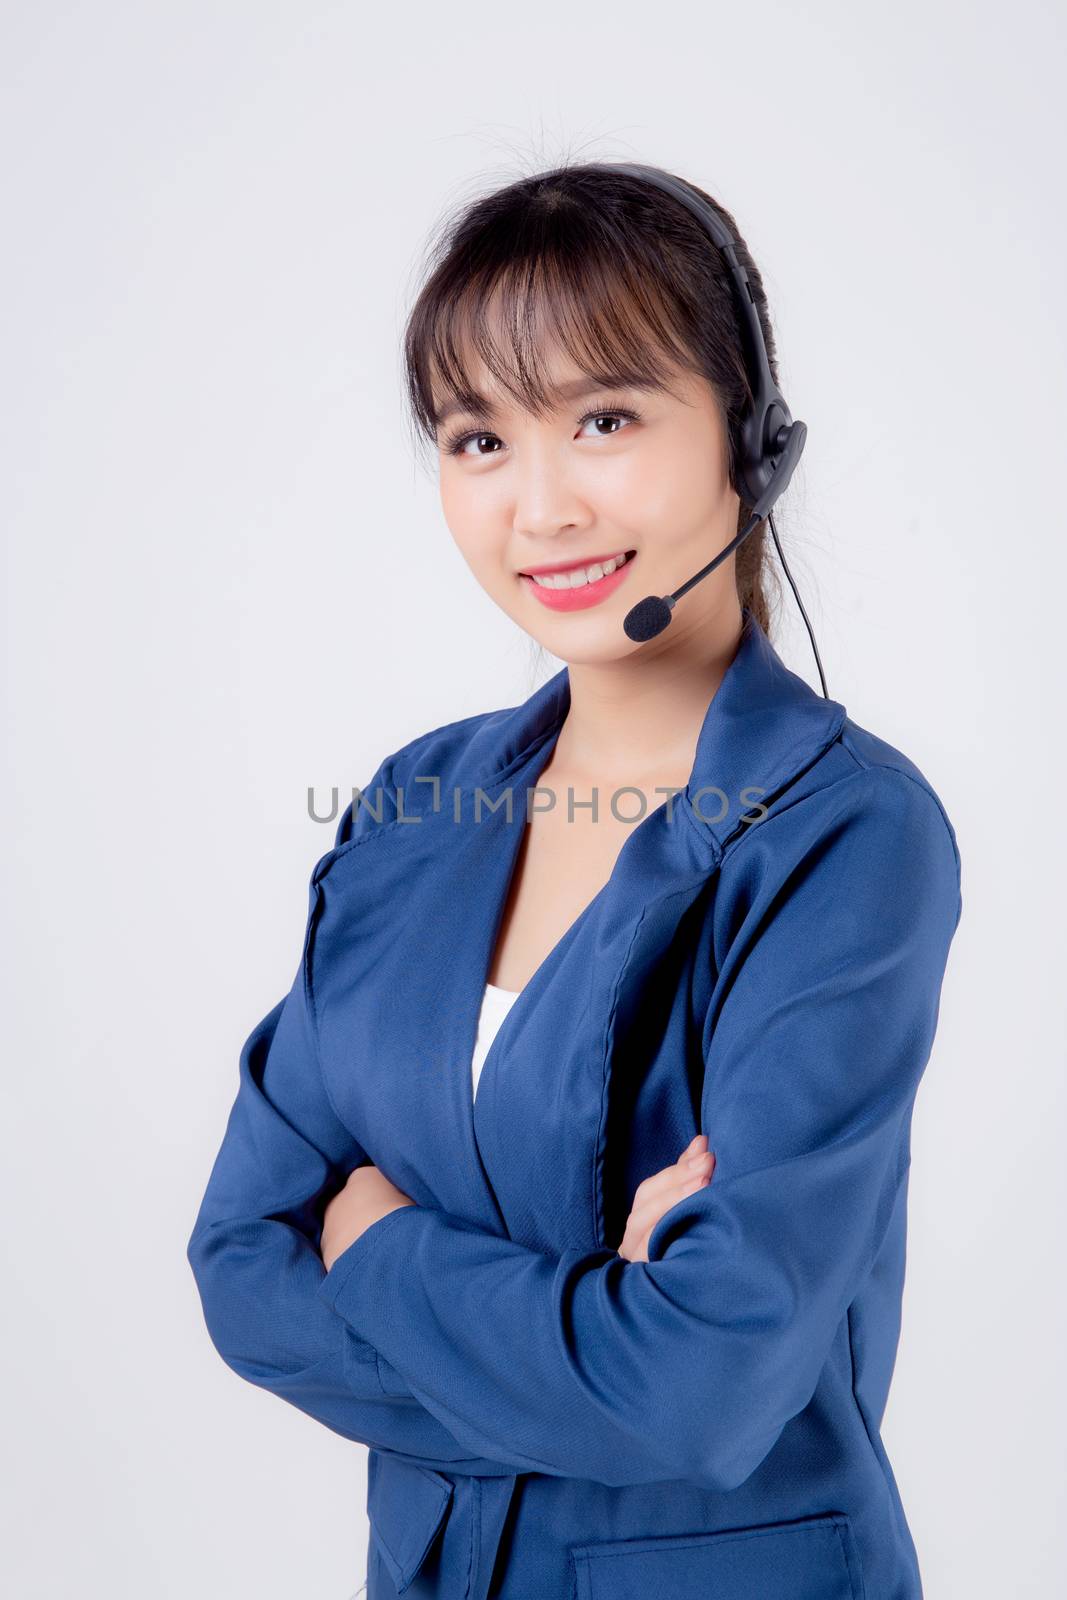 Beautiful portrait young asian business woman customer service j by nnudoo